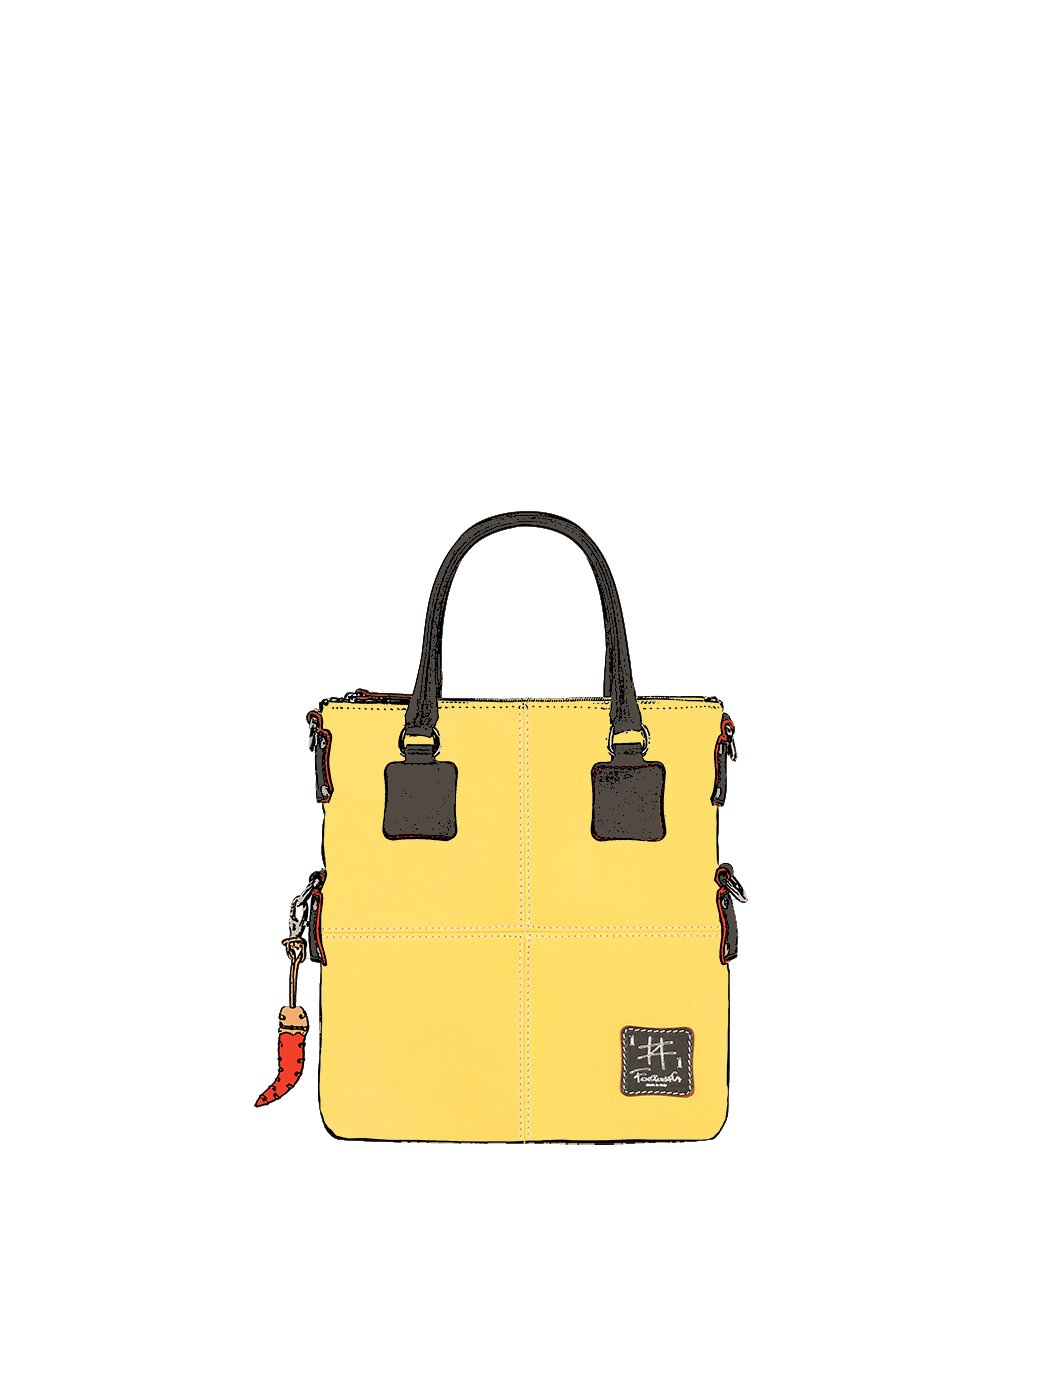 Small Handbag - Leather Tote Bag in Yellow